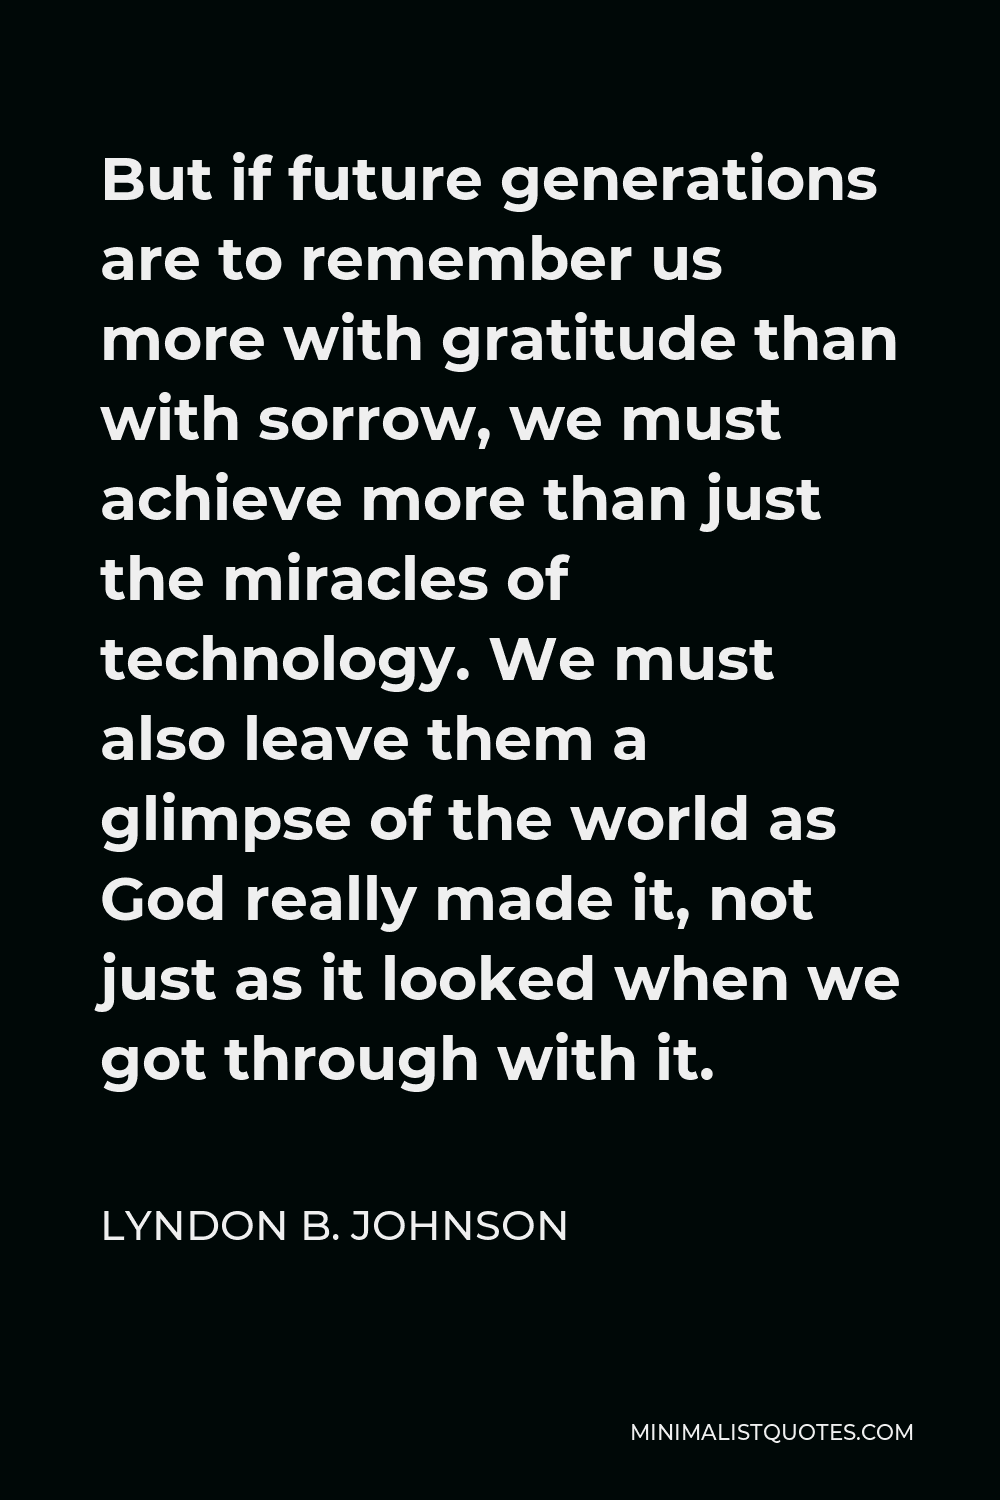 Lyndon B. Johnson Quote - But if future generations are to remember us more with gratitude than with sorrow, we must achieve more than just the miracles of technology. We must also leave them a glimpse of the world as God really made it, not just as it looked when we got through with it.